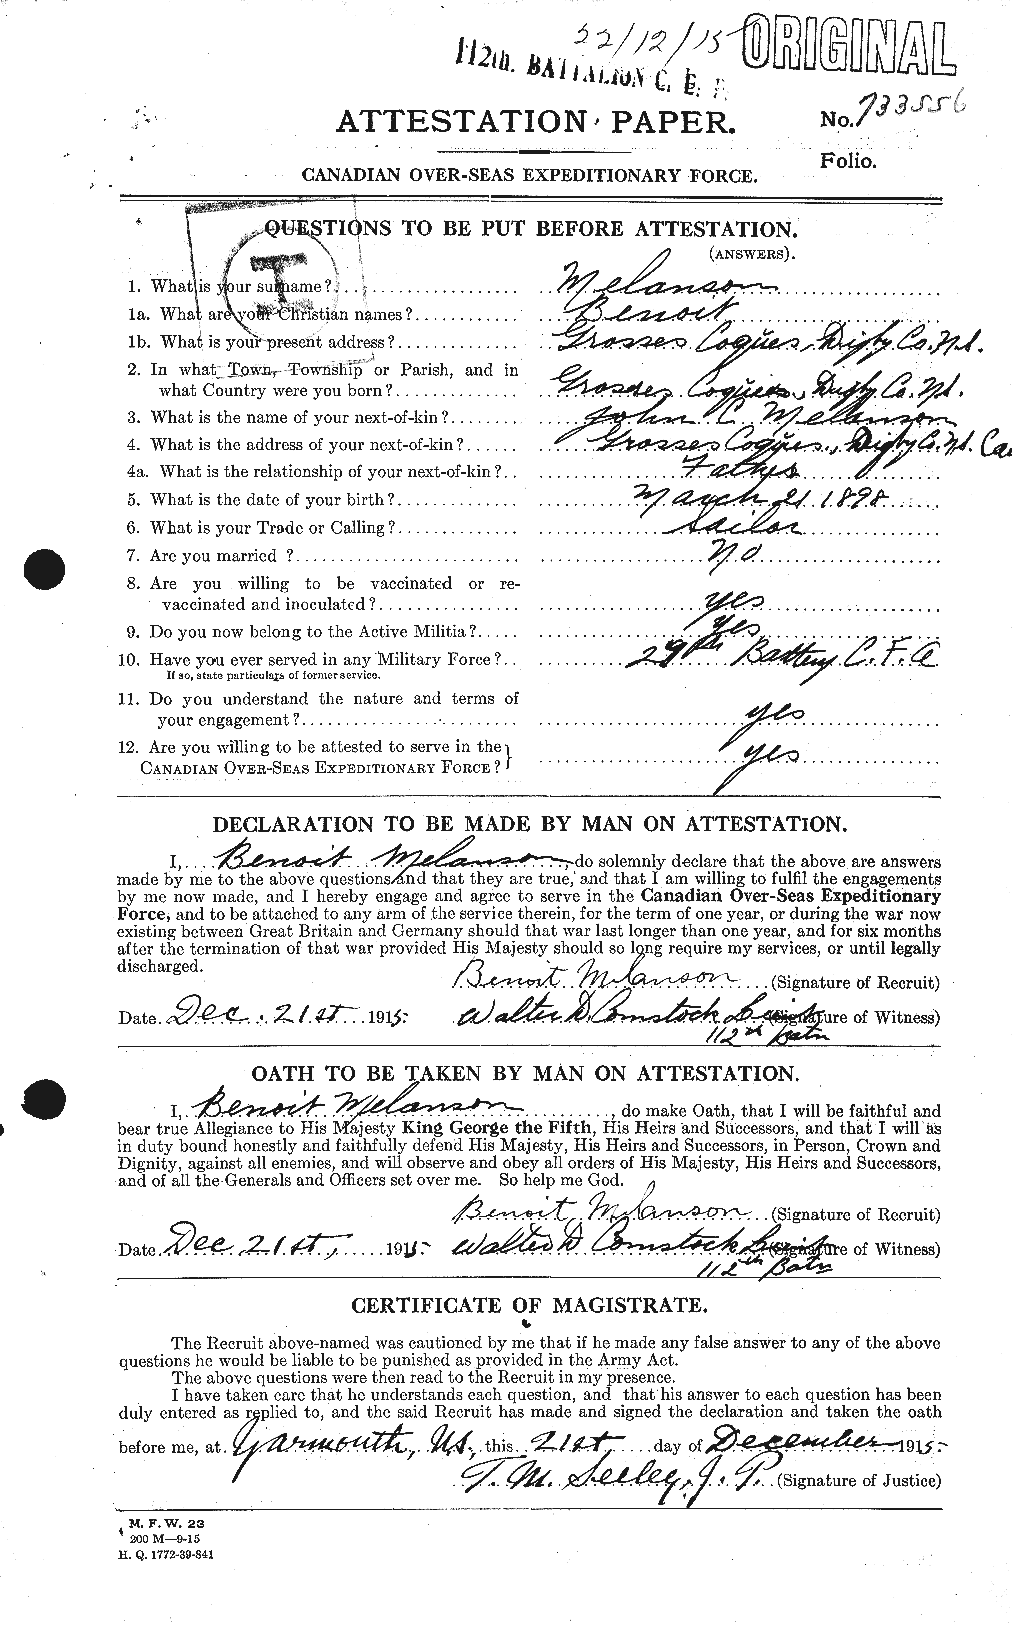 Personnel Records of the First World War - CEF 492039a